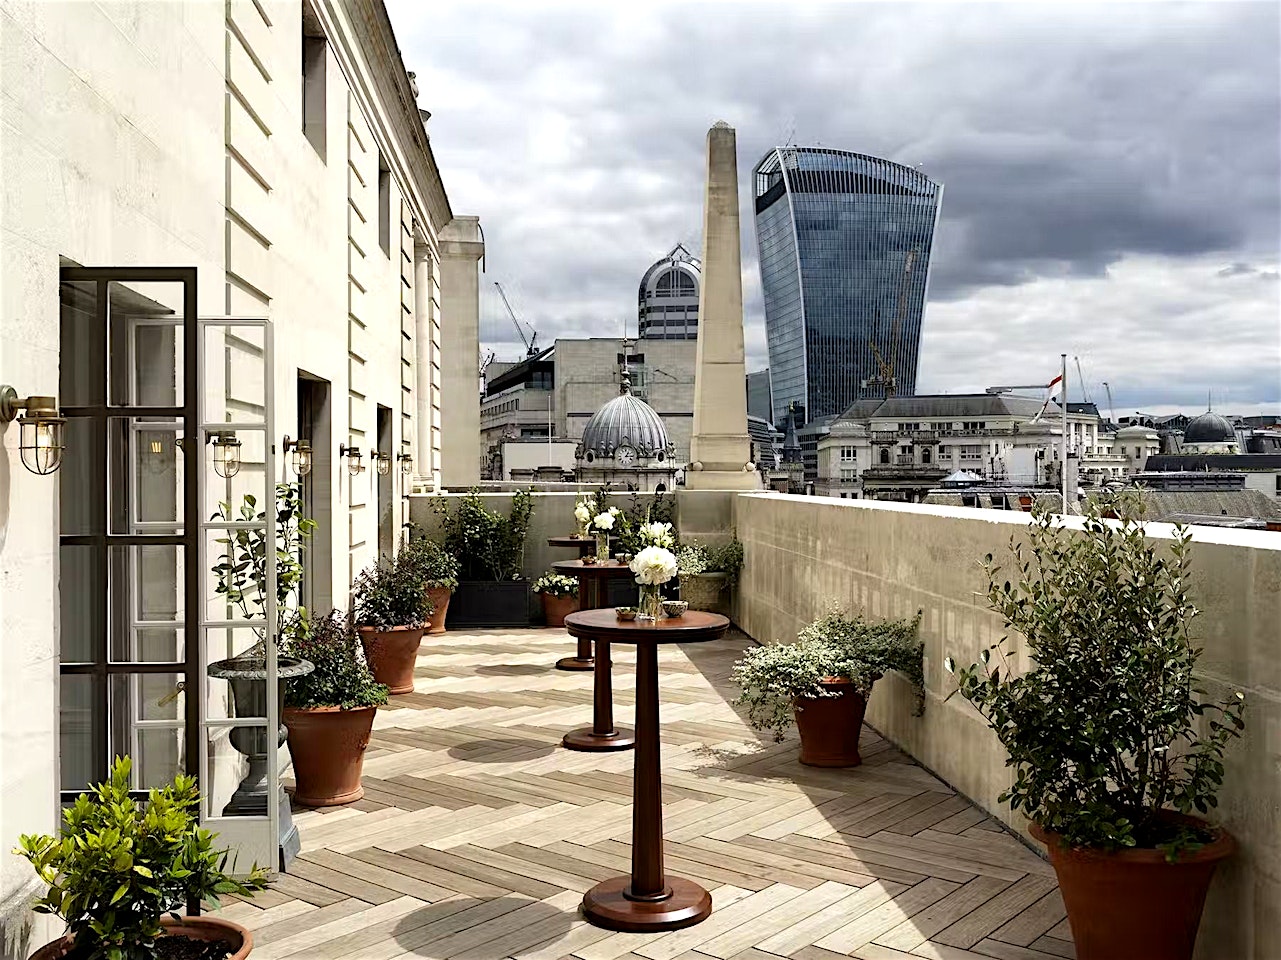 The ned london party venue roof terrace